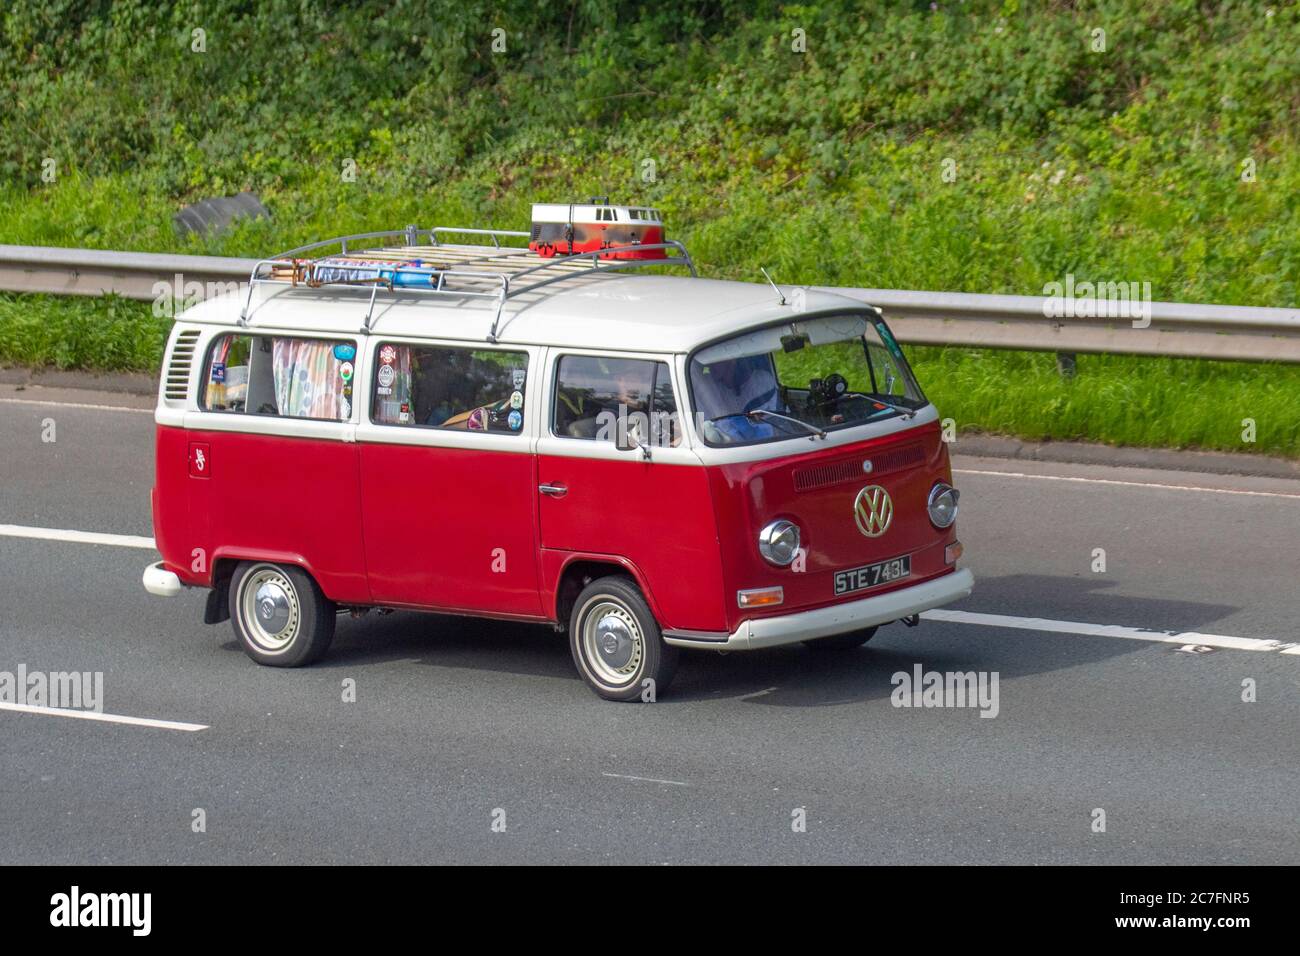 1972 70s Type 2 Red white VW Volkswagen LCV Motor Caravan;Touring Caravans and Motorhomes, 70s campervans on Britain's roads, RV leisure vehicle, mini bus family holidays, caravanette vacations, caravan holiday, van conversions, autohome, life on the road Stock Photo